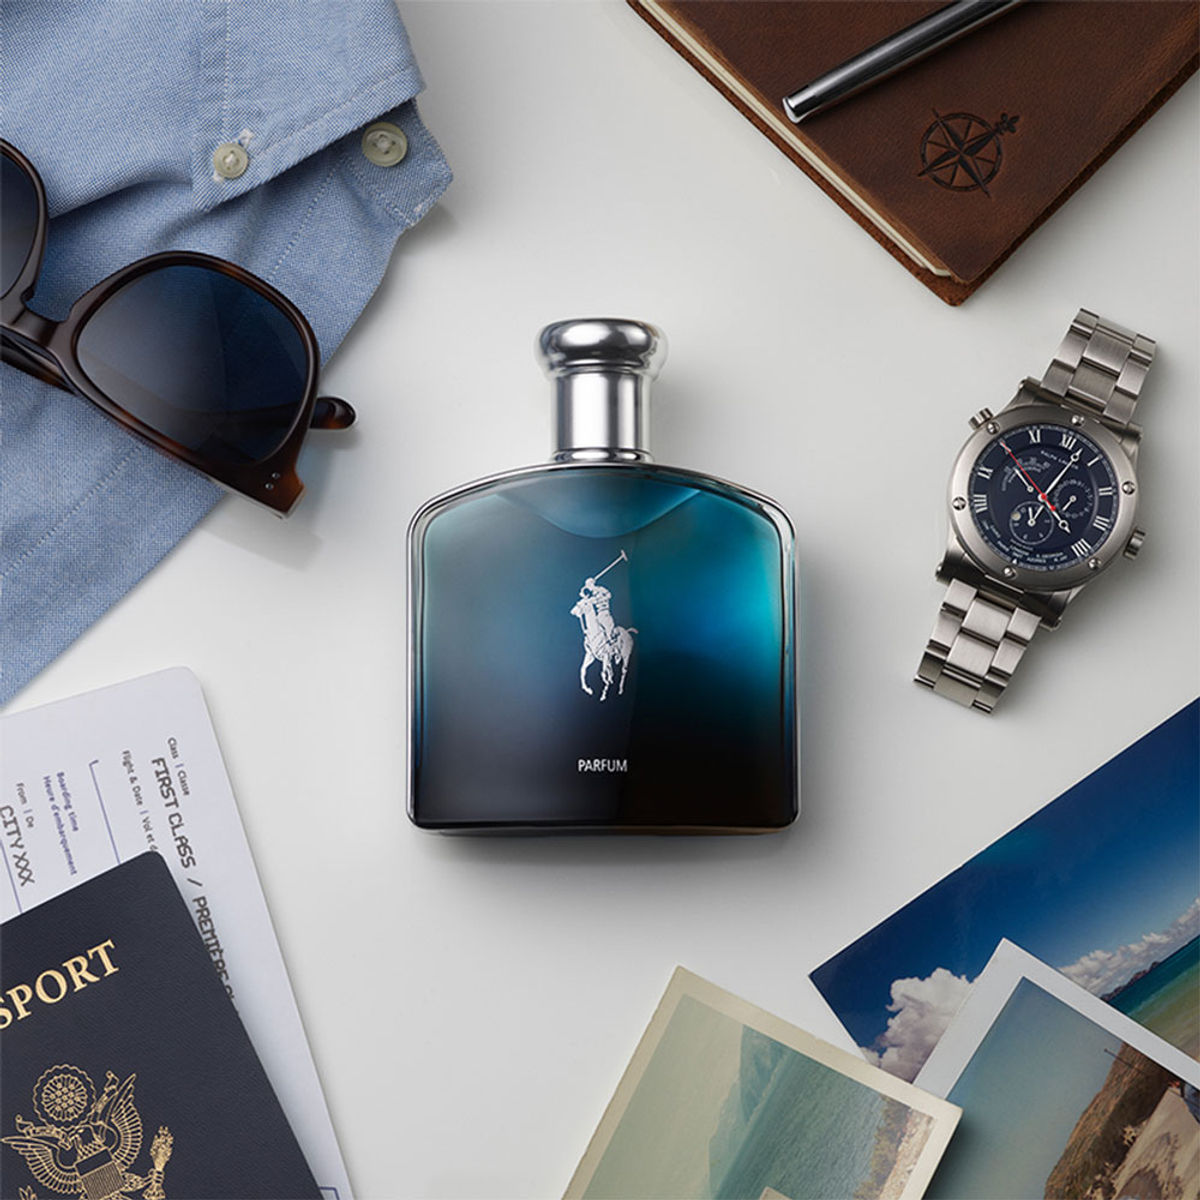 Polo Deep Blue Parfum by Ralph Lauren in this compliment test ft. @Che